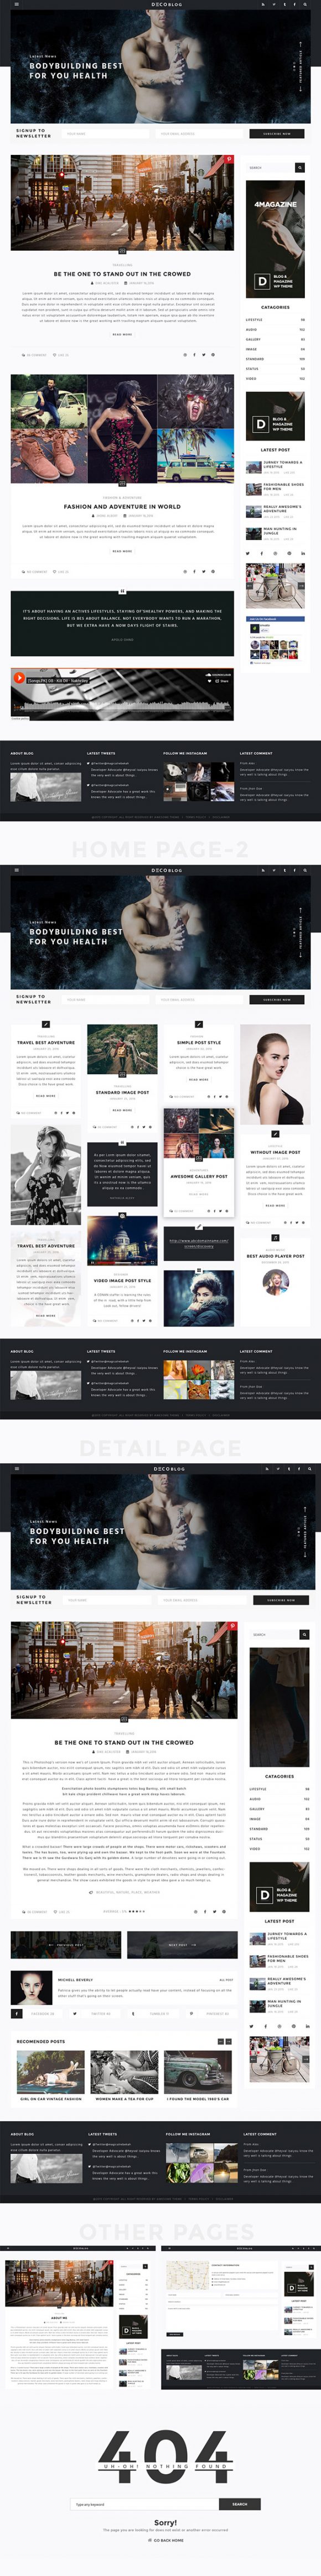 Personal blog PSD template - Full preview